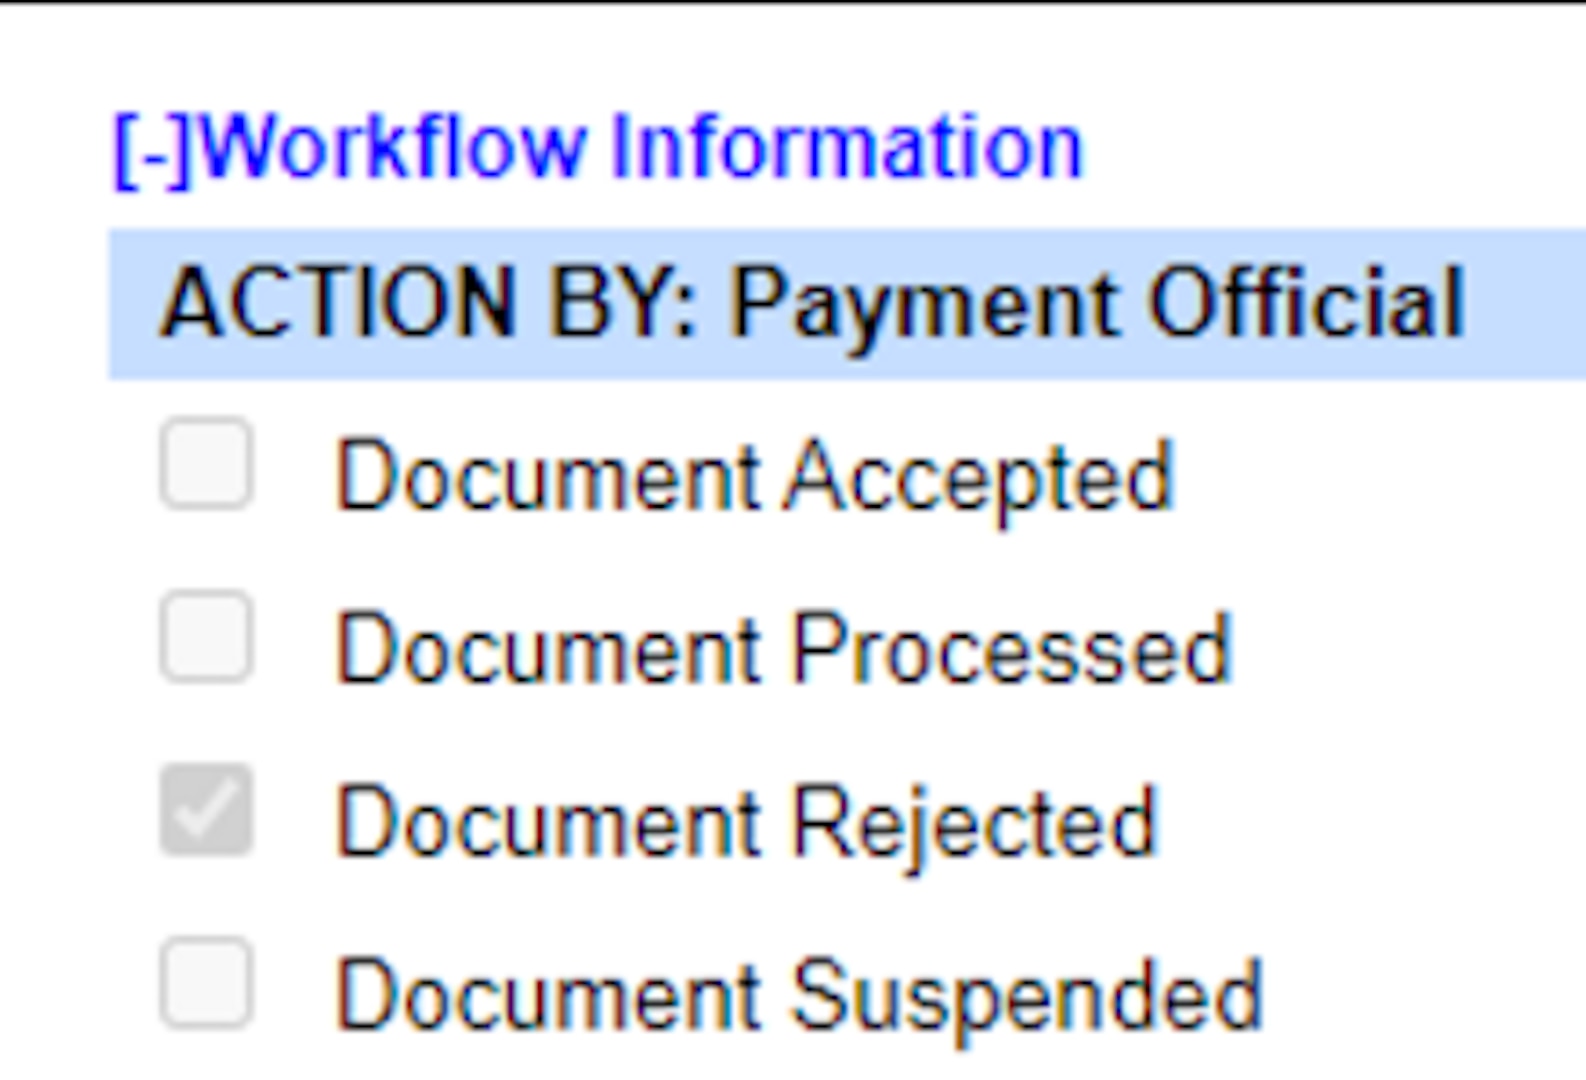 Action By: Payment Official in WAWF has a check mark beside Document Rejected label